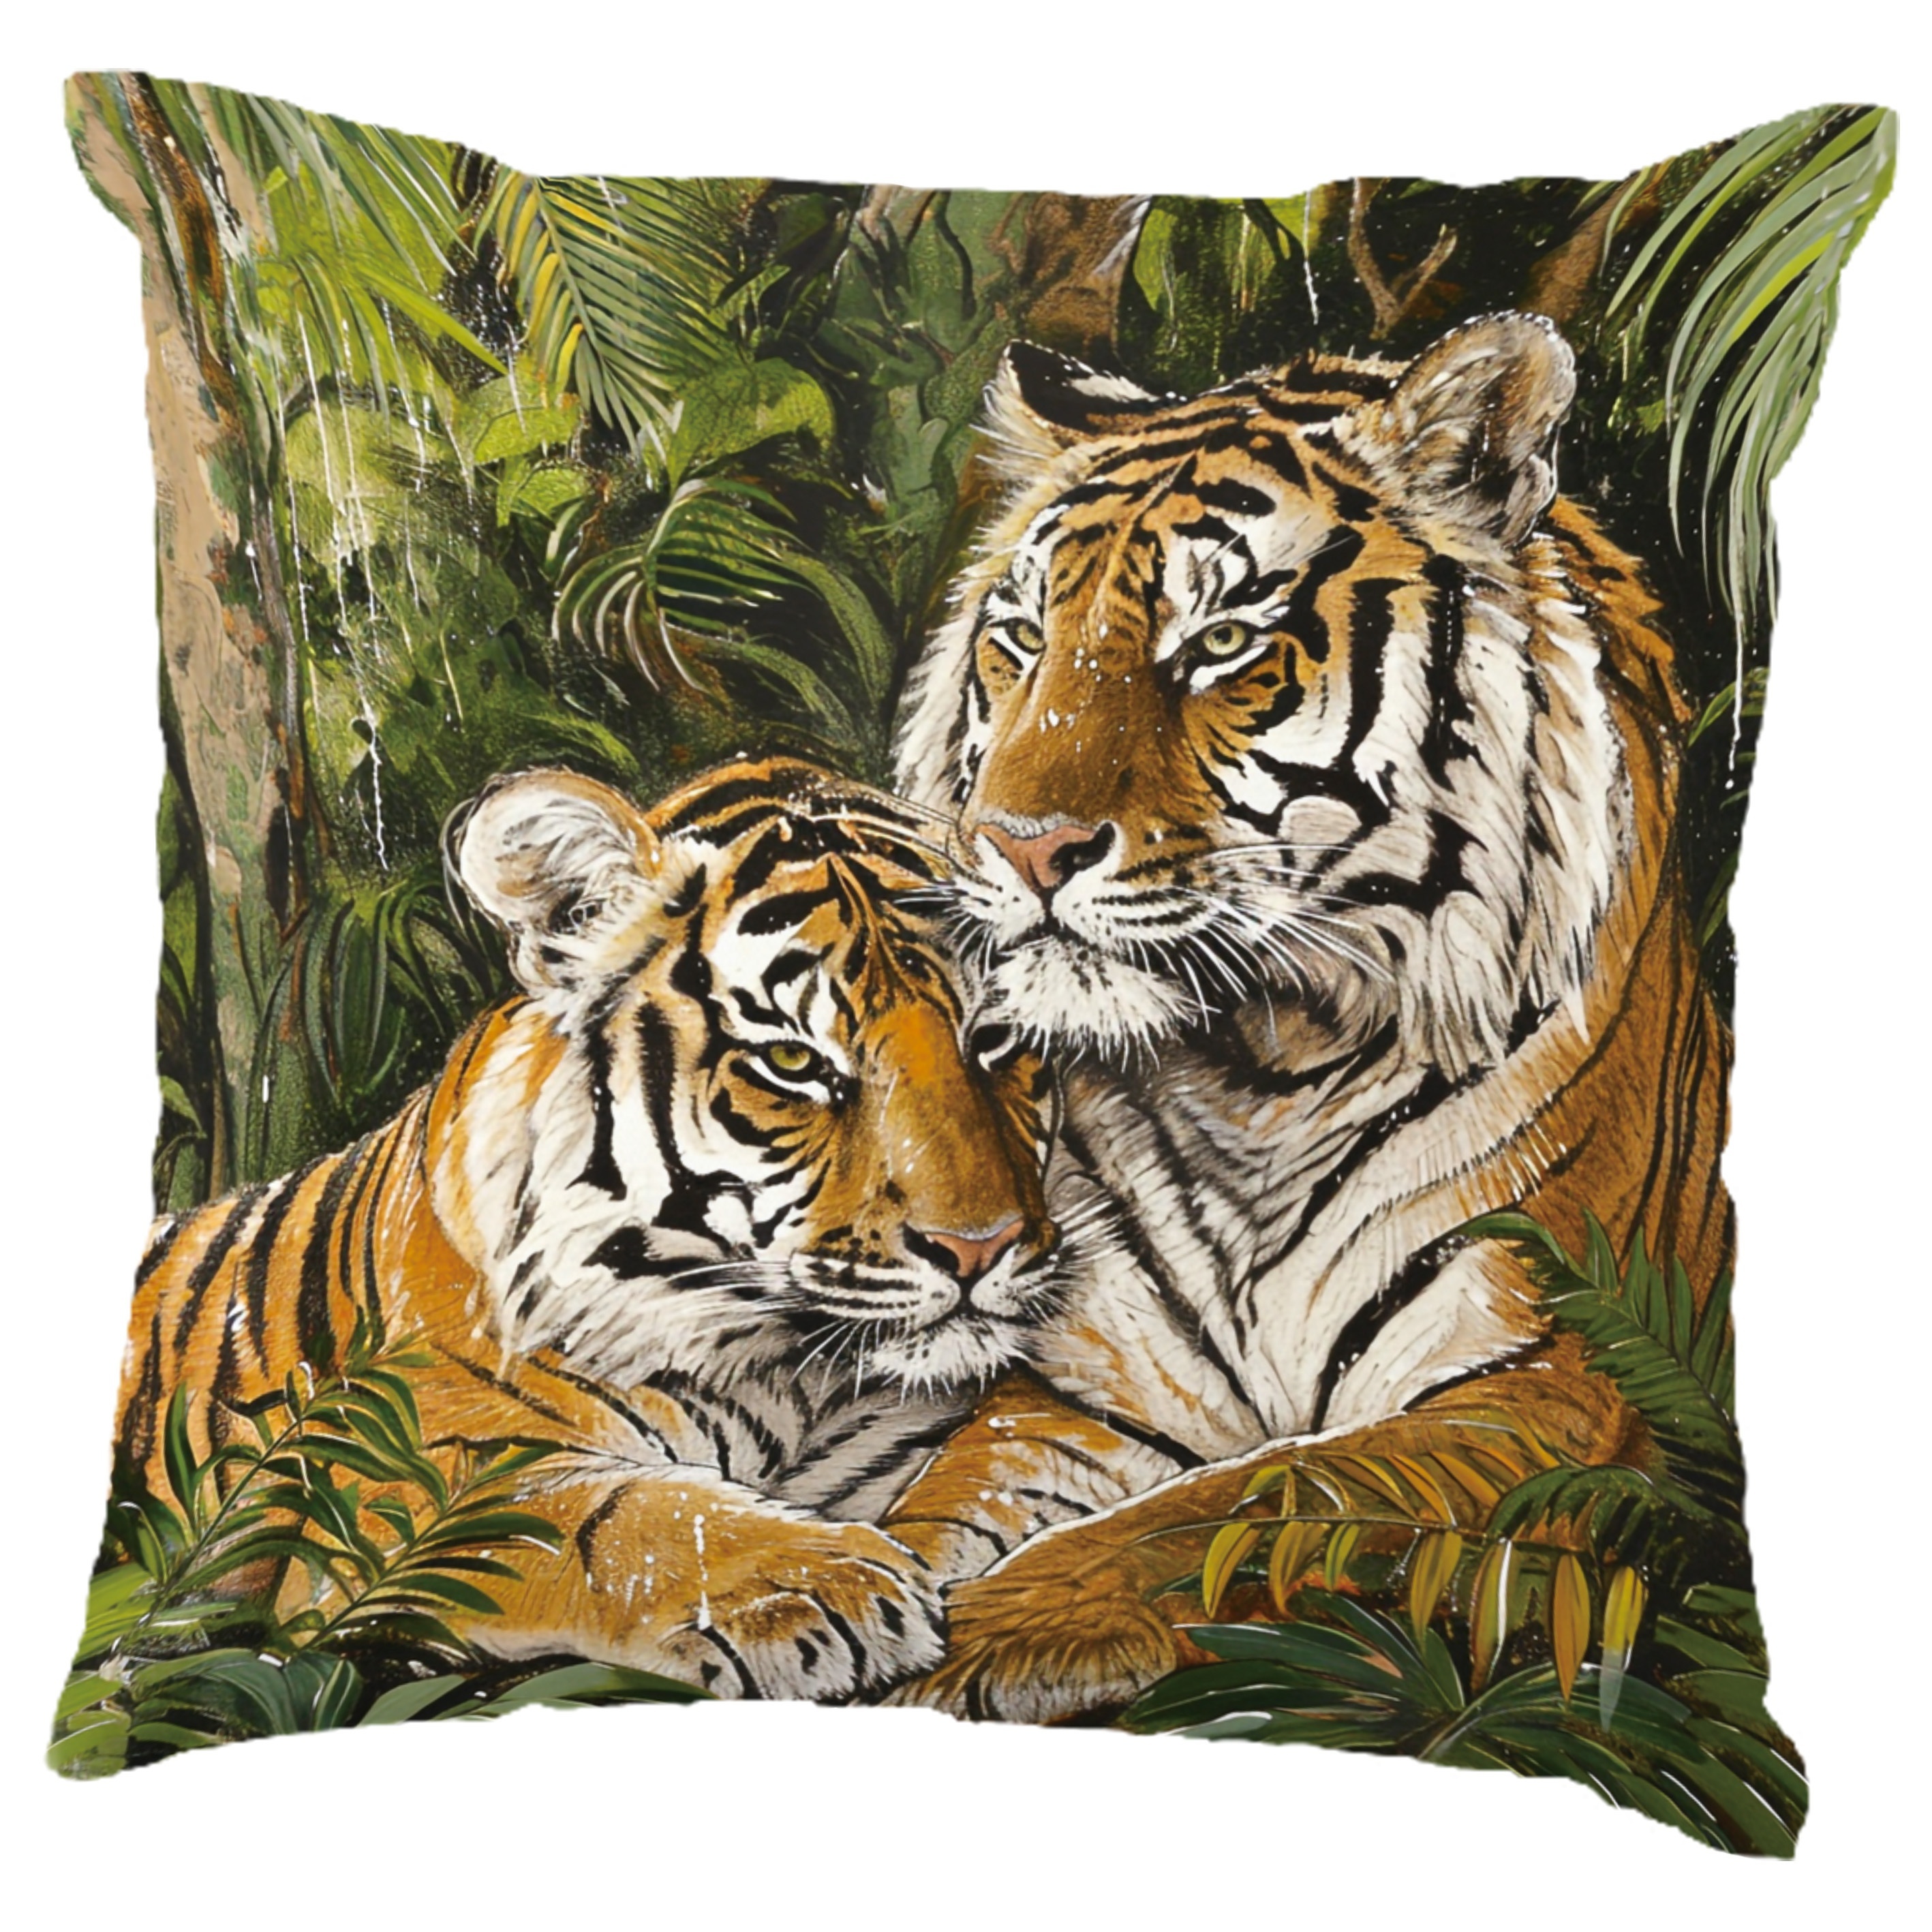 

1pc, Tiger, Fashion Pattern, Printed Pillowcase, Home Decor, Room Decor, Living Room Decor, Bedroom Decor, Sofa Decor, Throw Pillow Case, 18in*18in, Pillow Insert Not Included